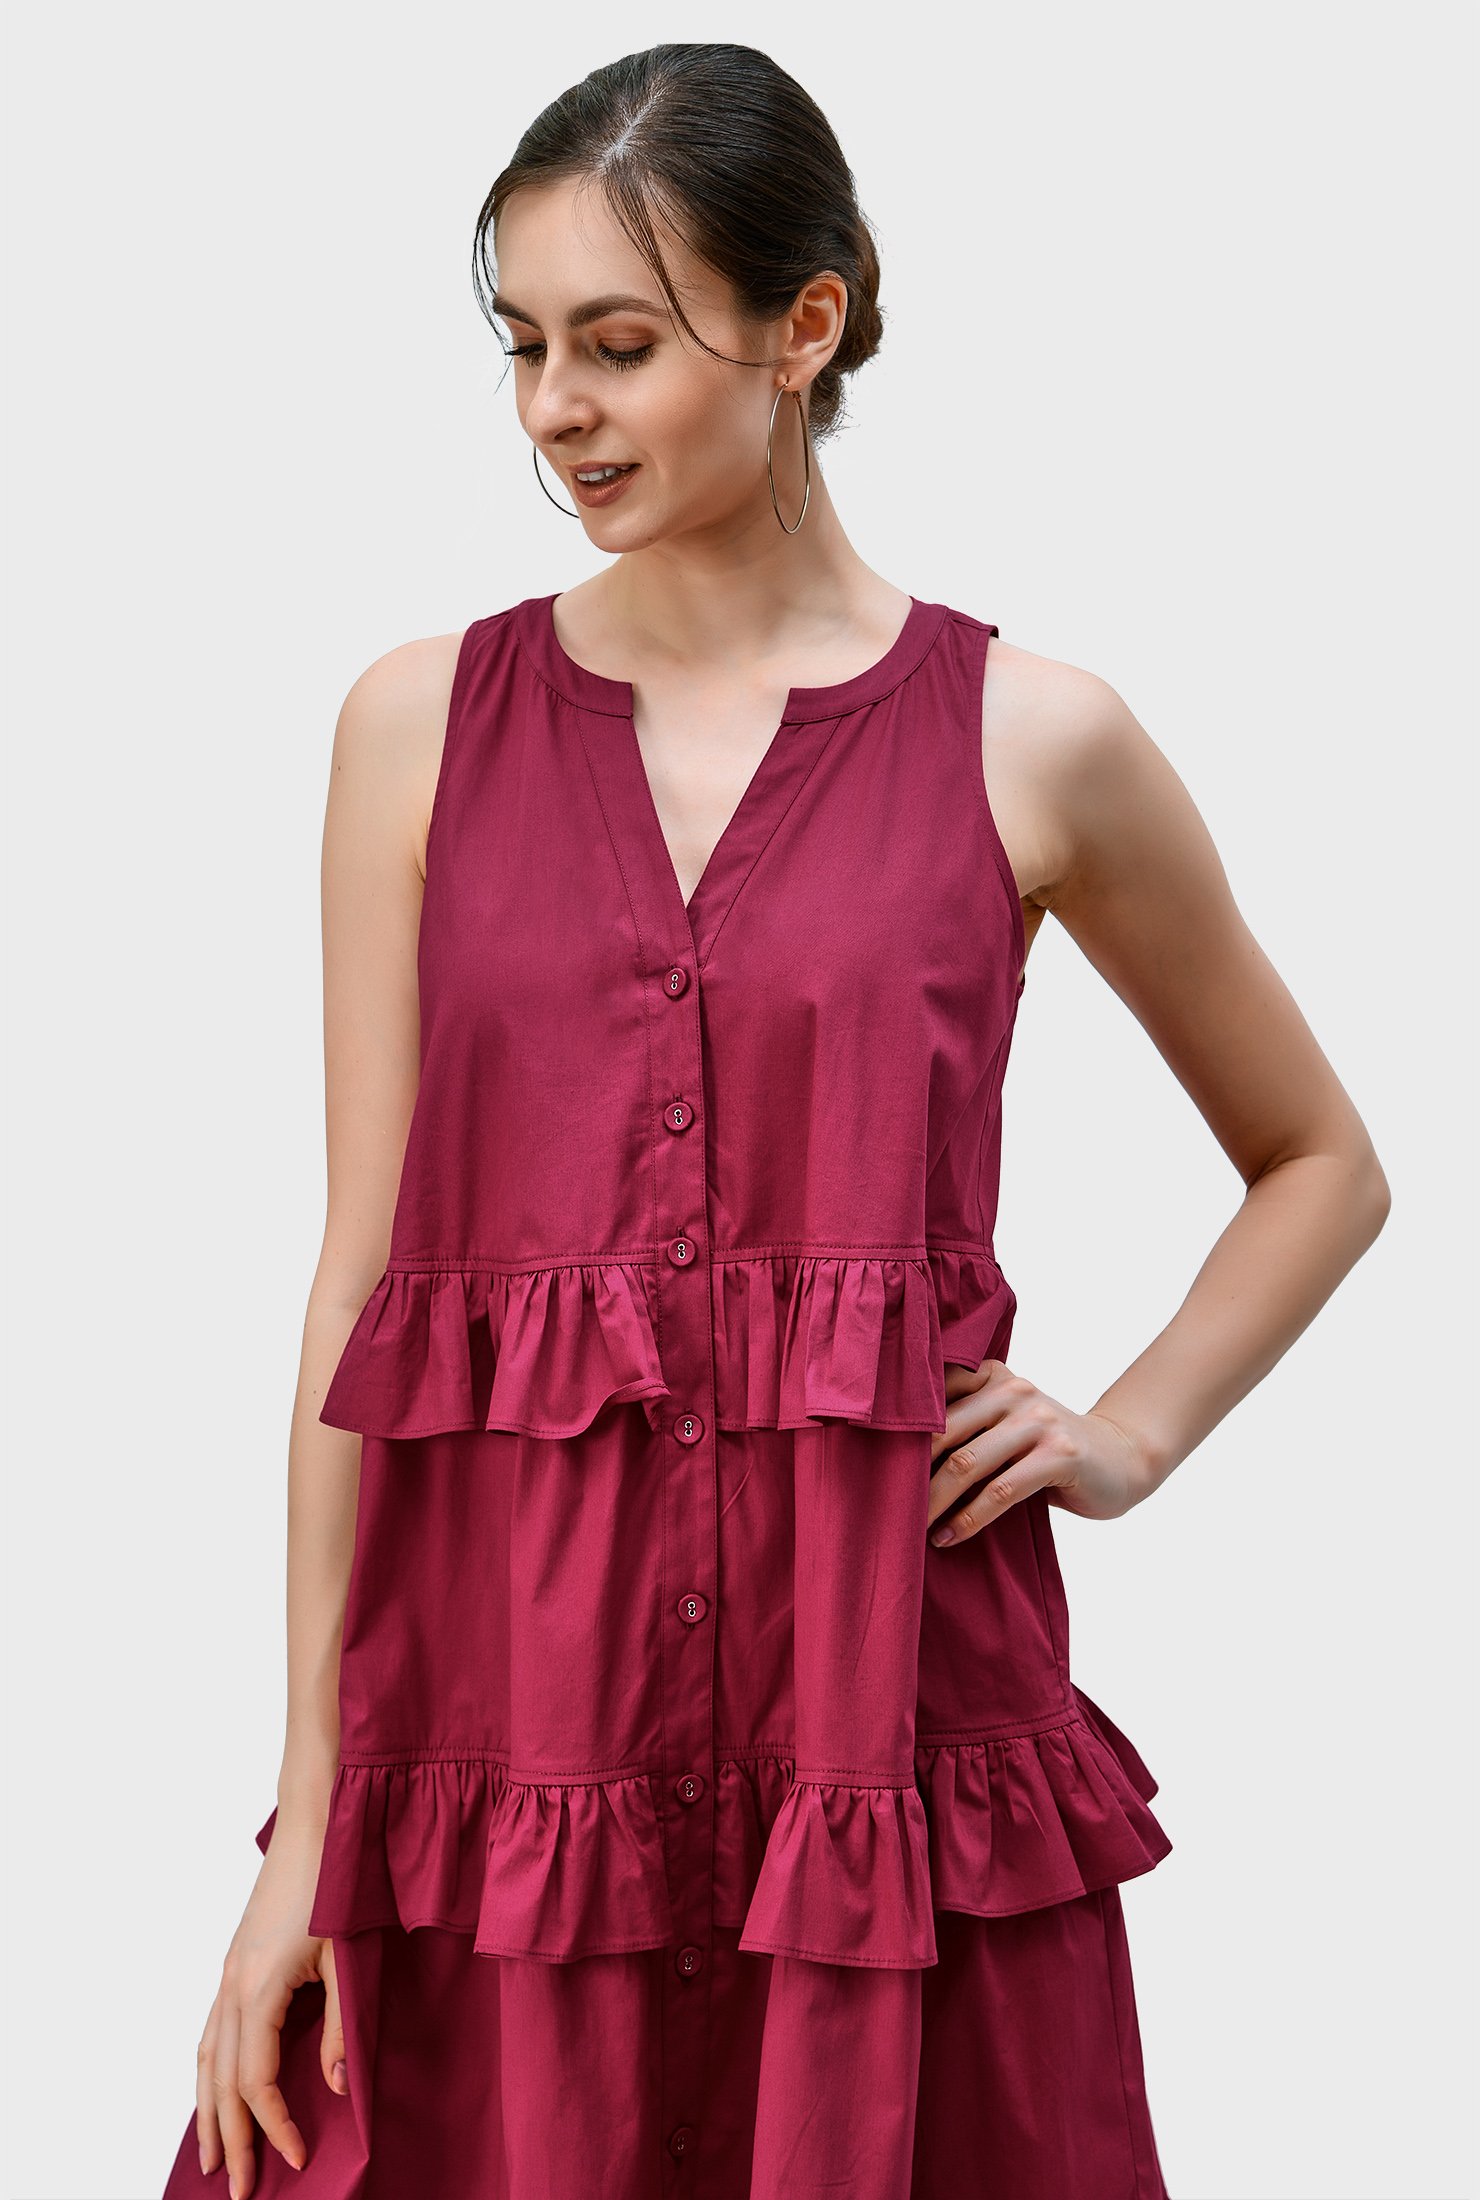 Here come the sundresses! Look on the bright side with our cotton poplin dress featuring an easy button-front, airy ruffles and a tiered full skirt.